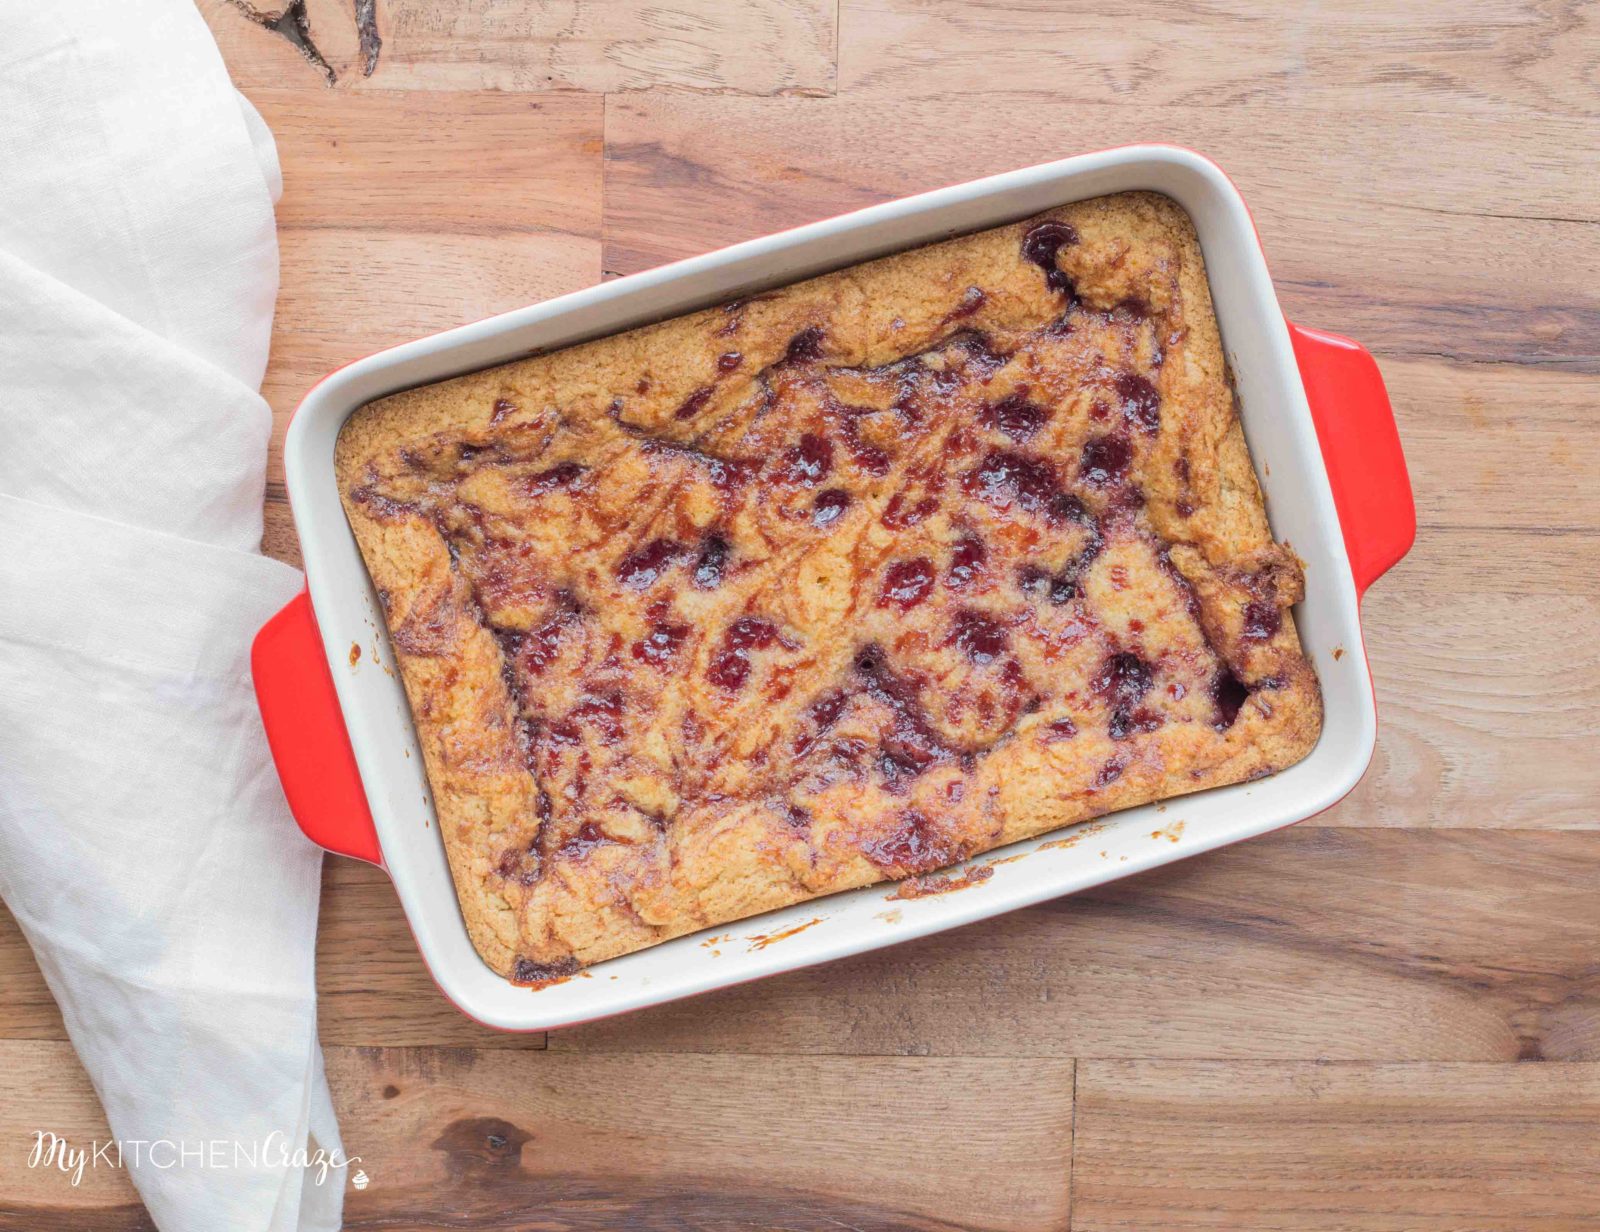 Raspberry Blondies ~ mykitchencraze.com ~ Simple and delicious blondie bars everyone will love.